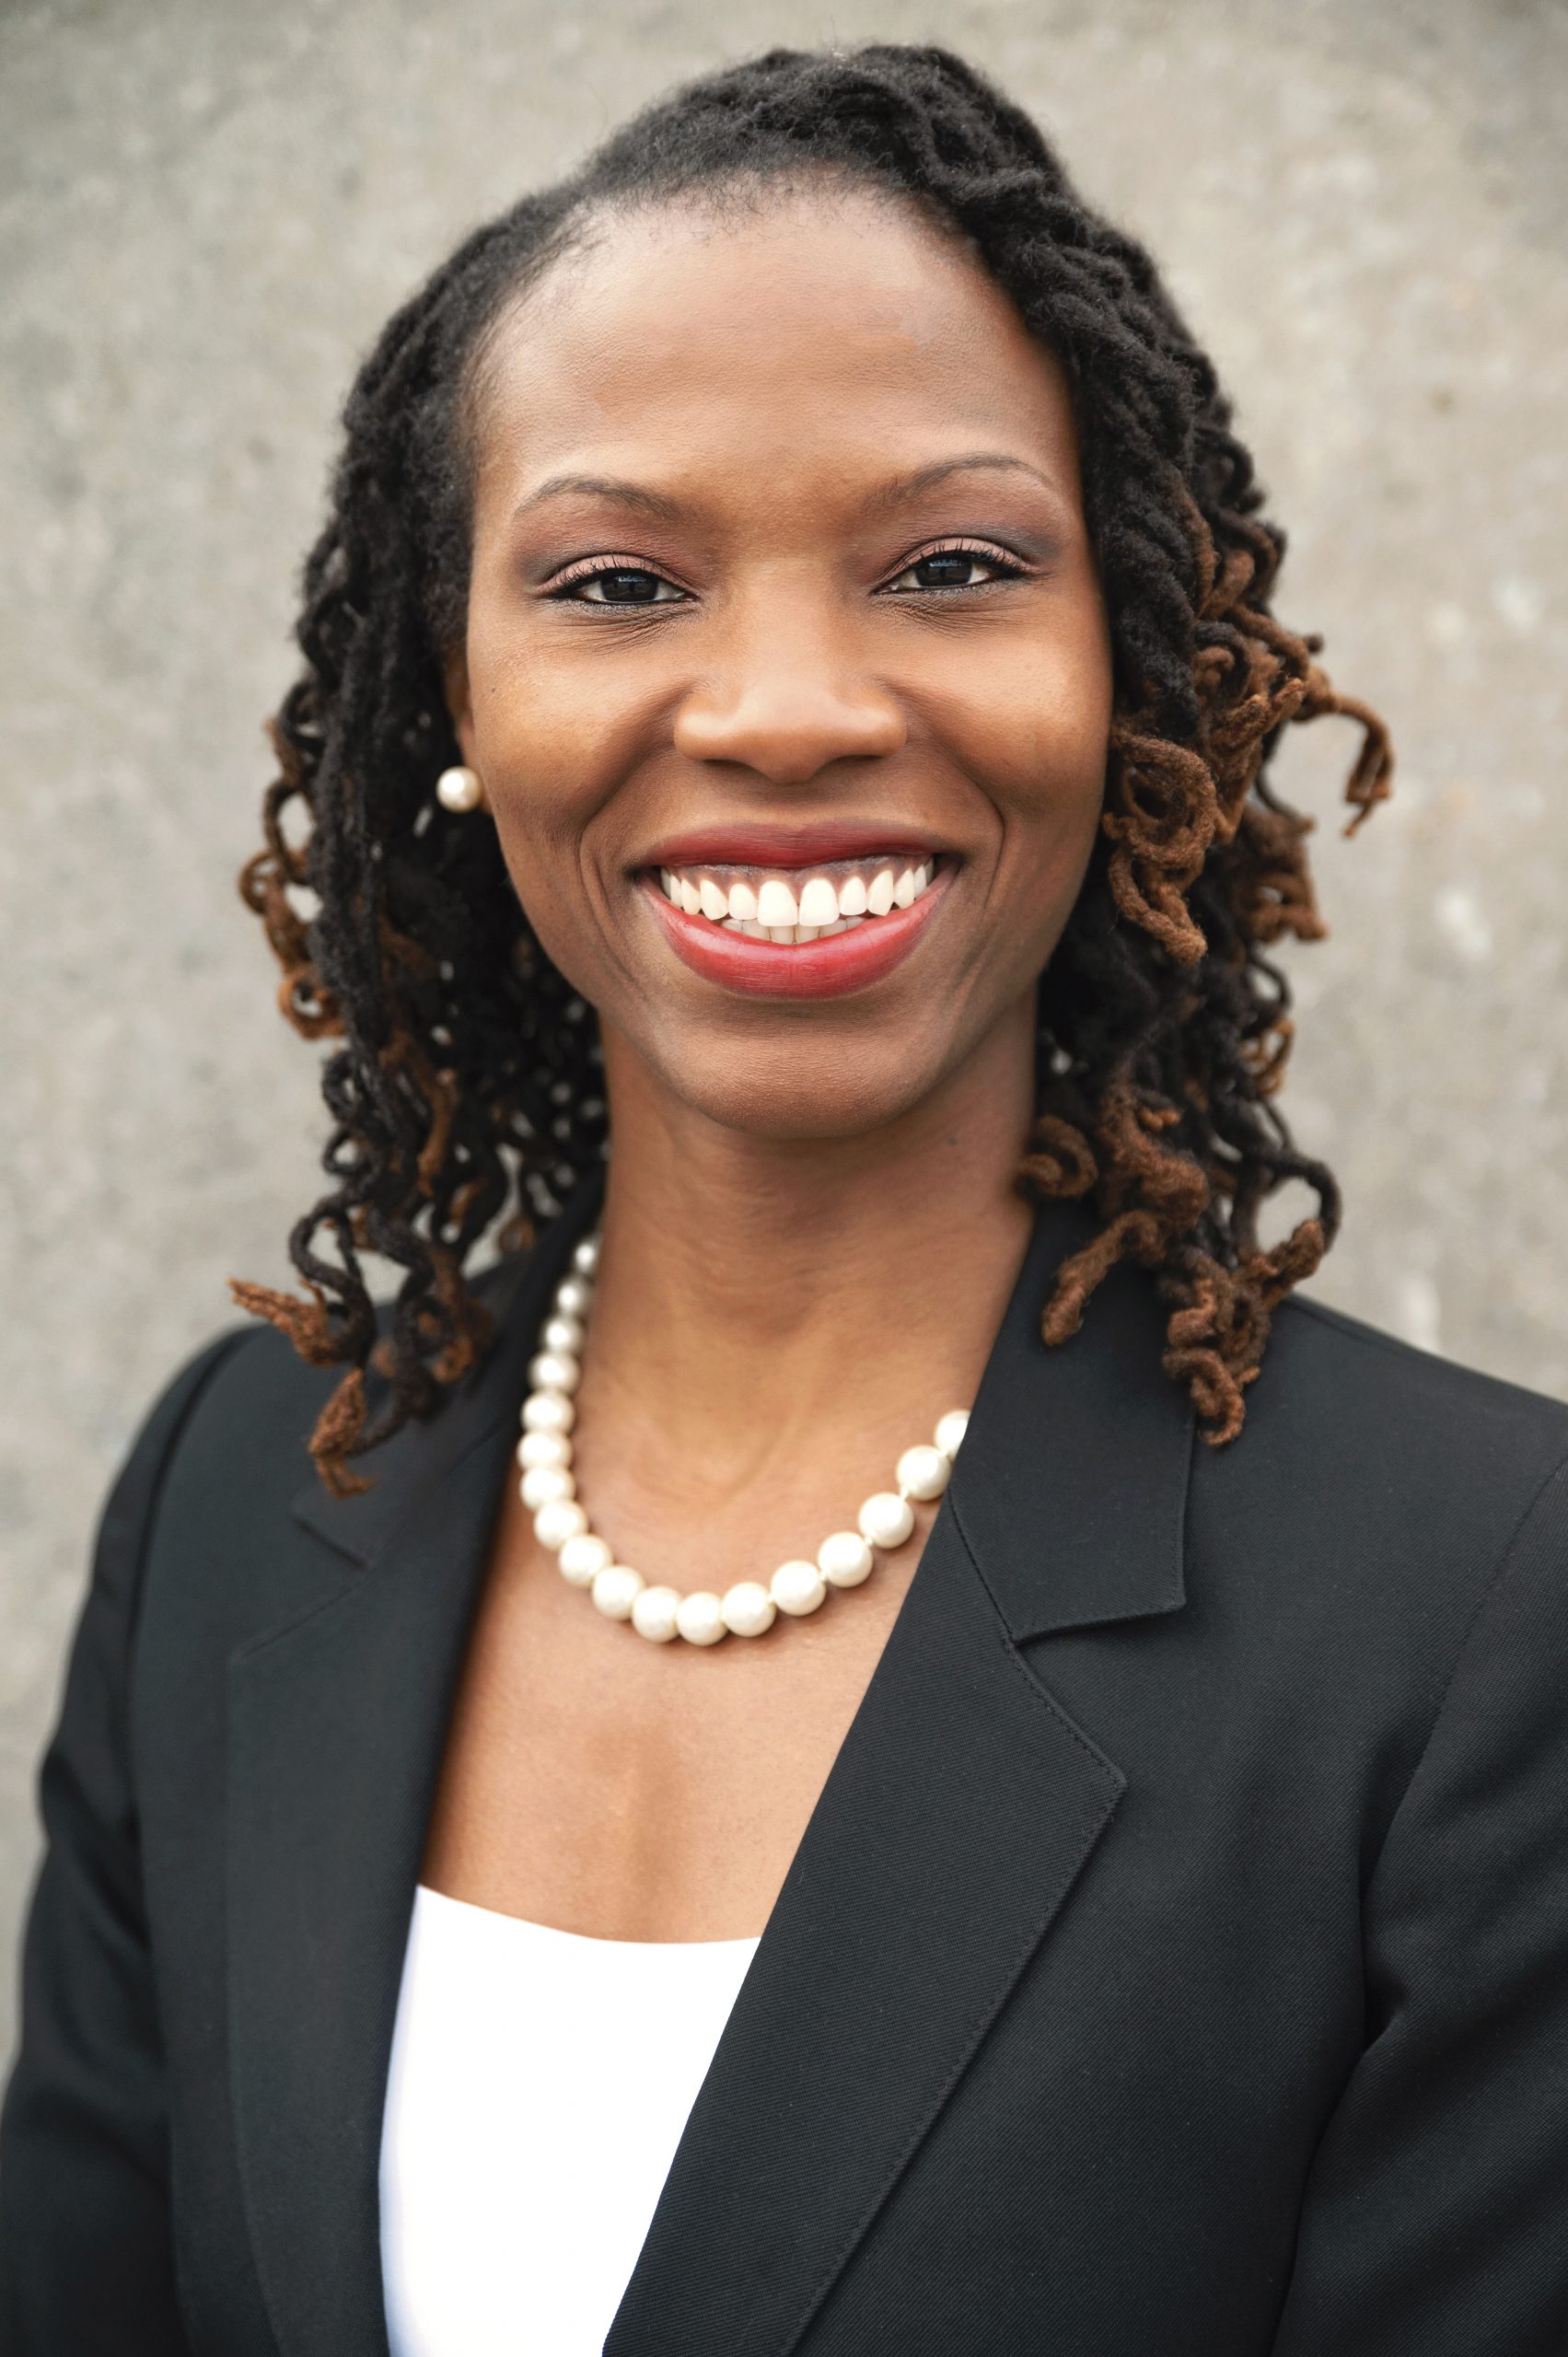 Dwan Courtney appointed as Director of the Office of Small Business and Supplier Diversity